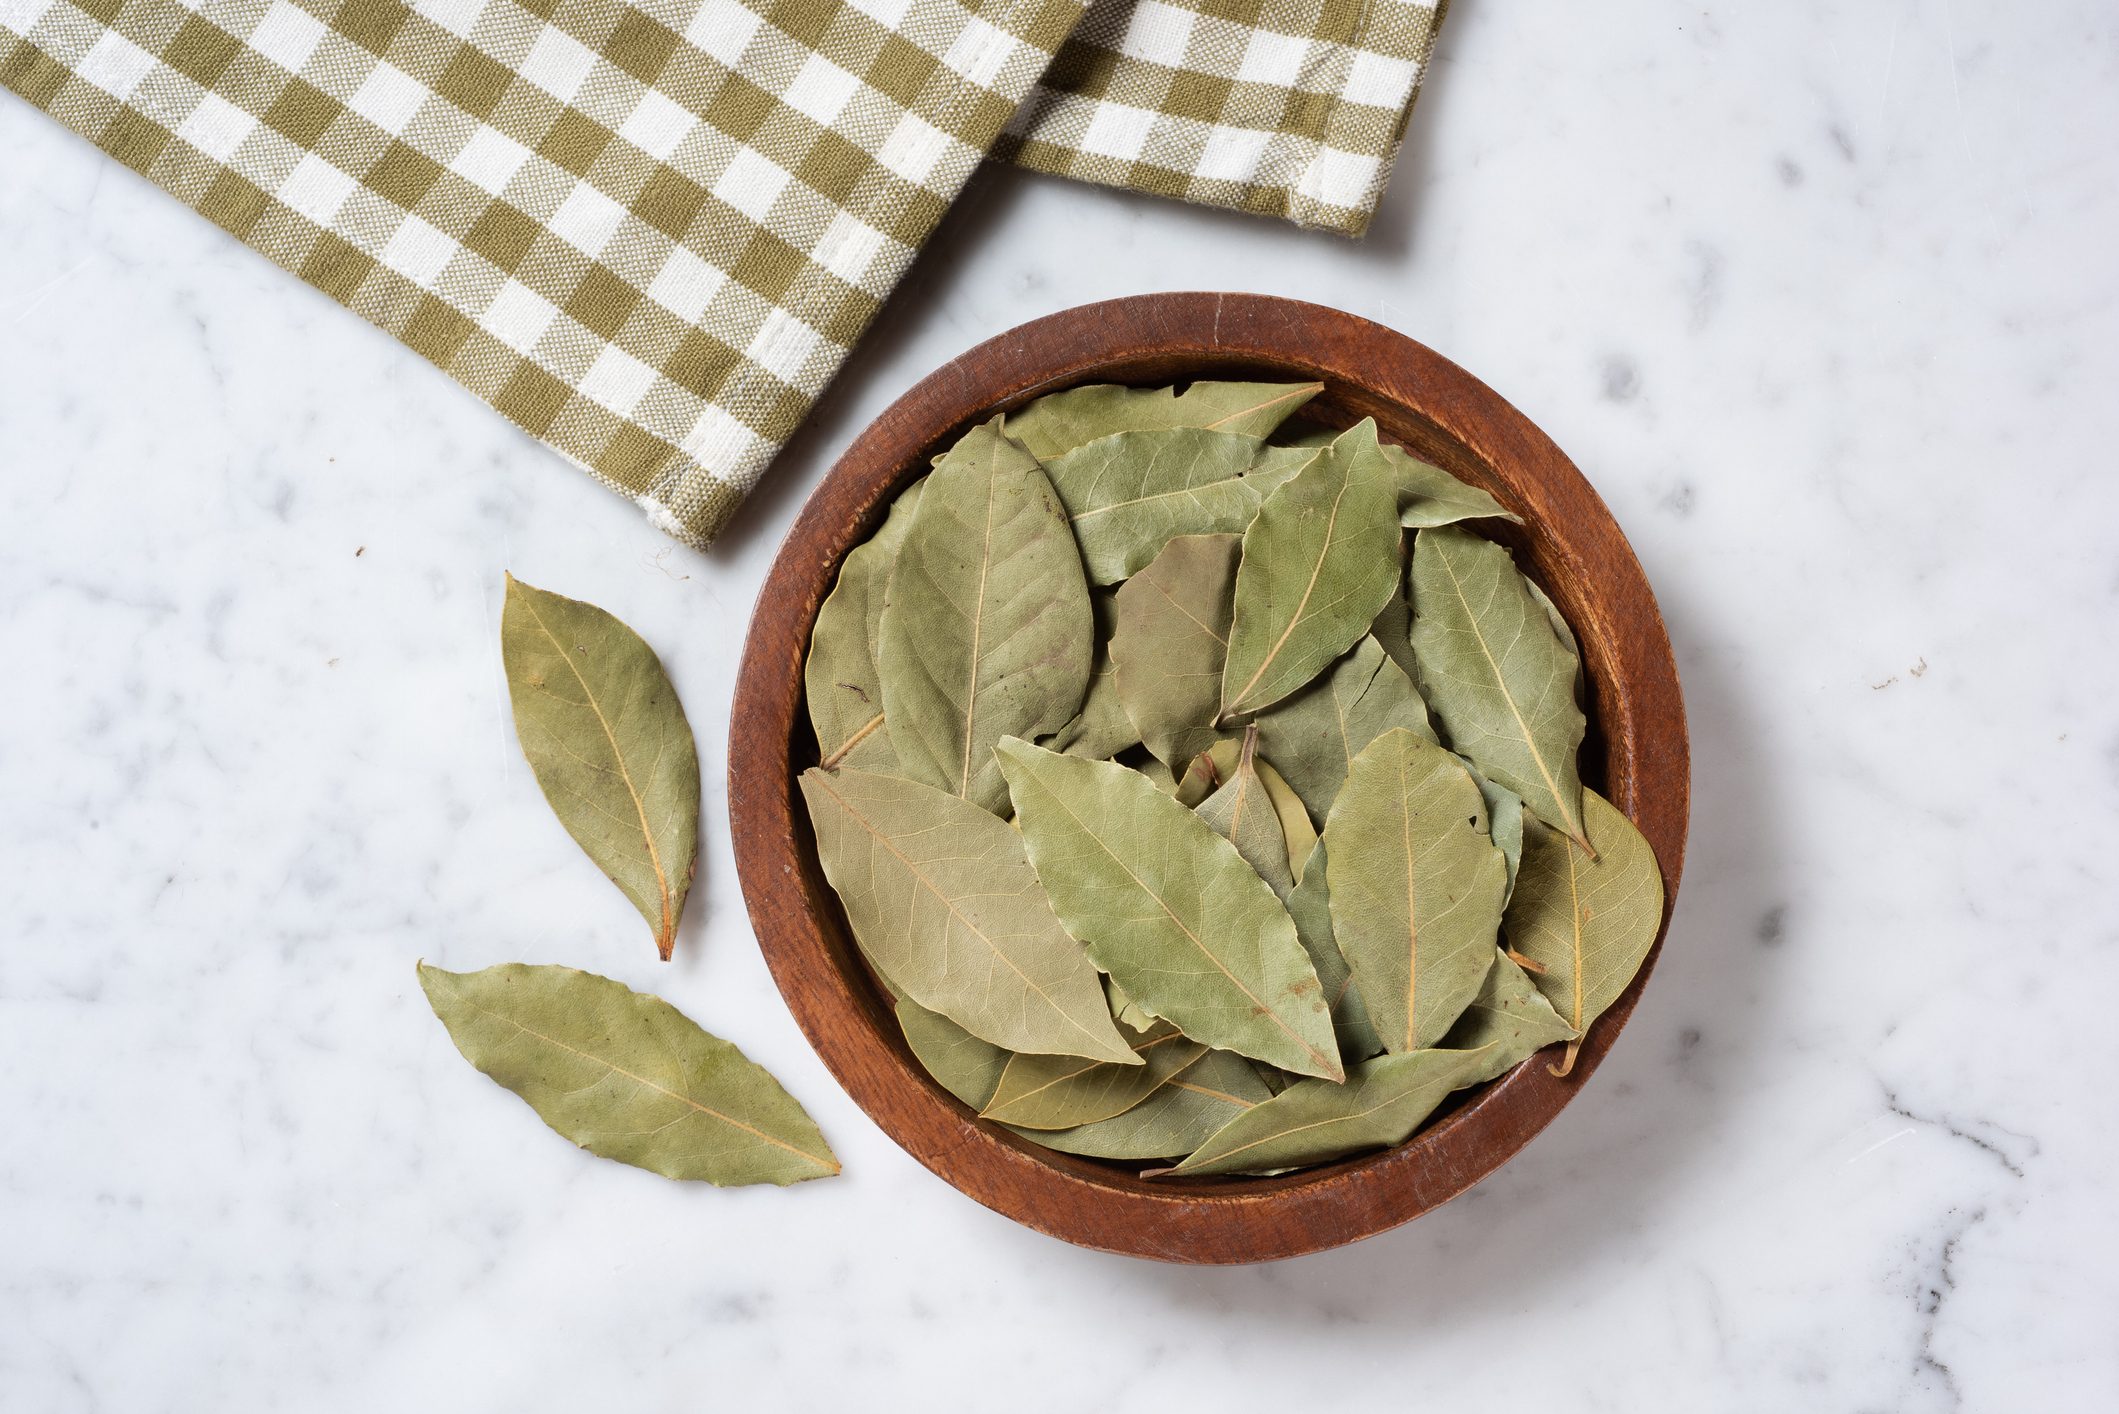 Can You Eat Bay Leaves?